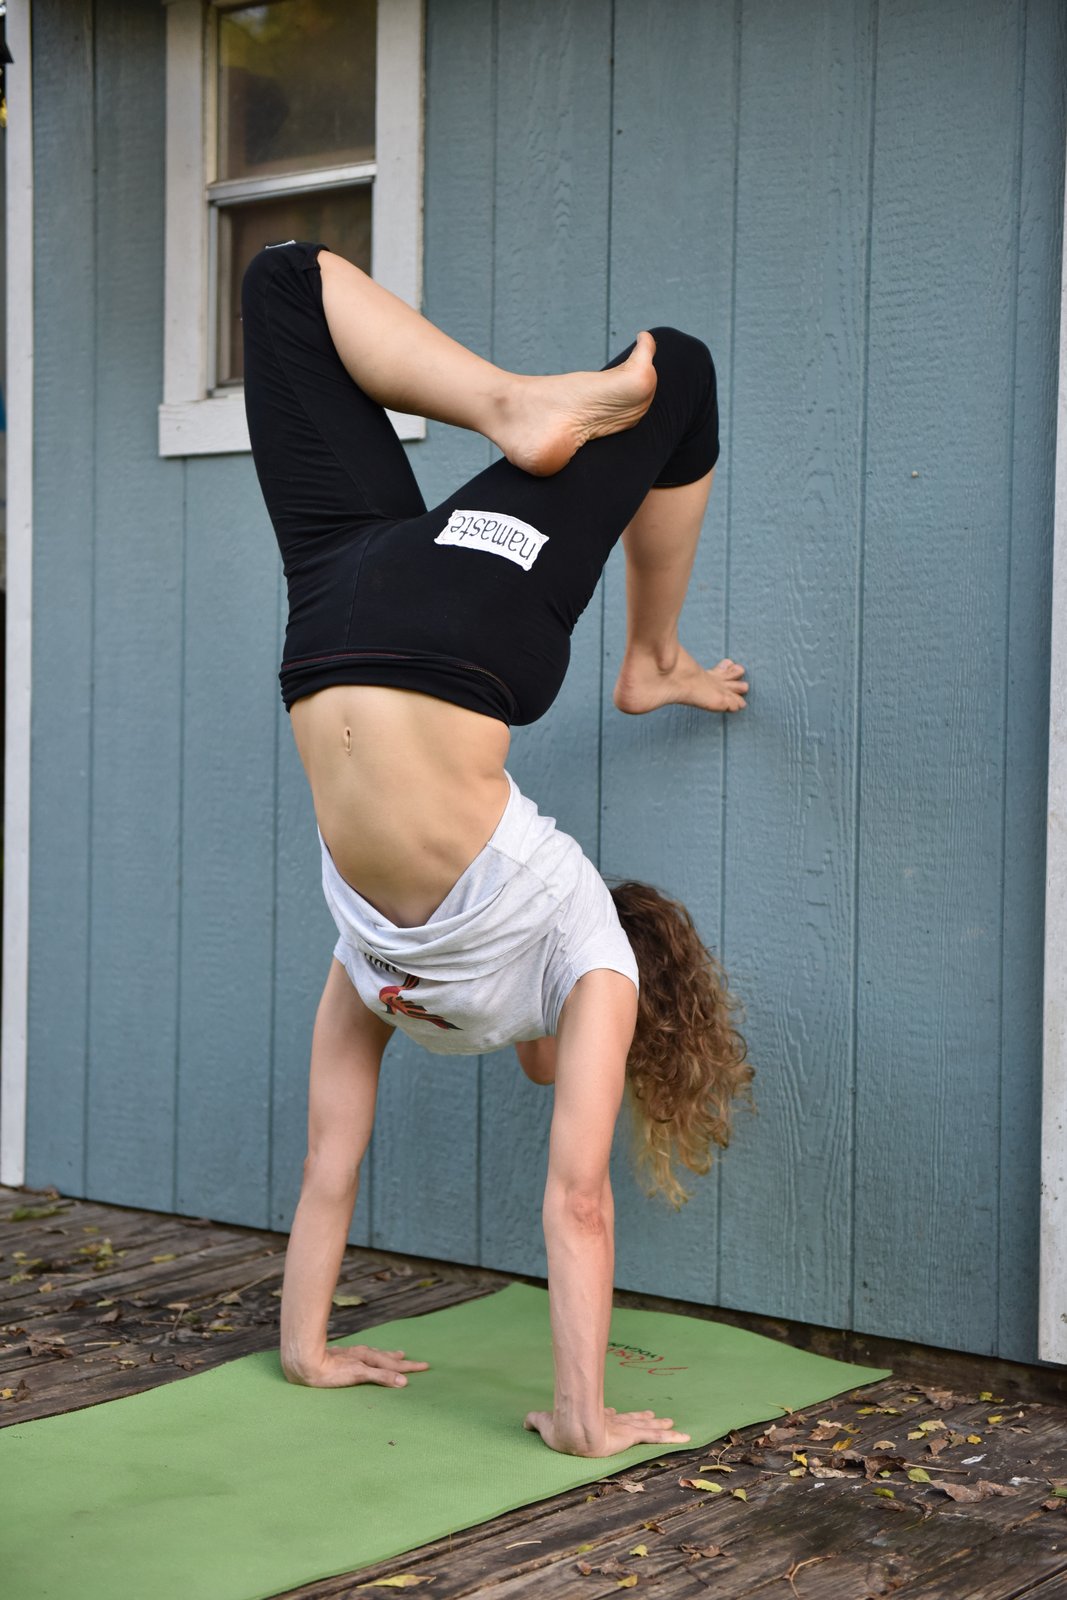 How to Do Handstand: Get Up and Stay Up - Organic Authority